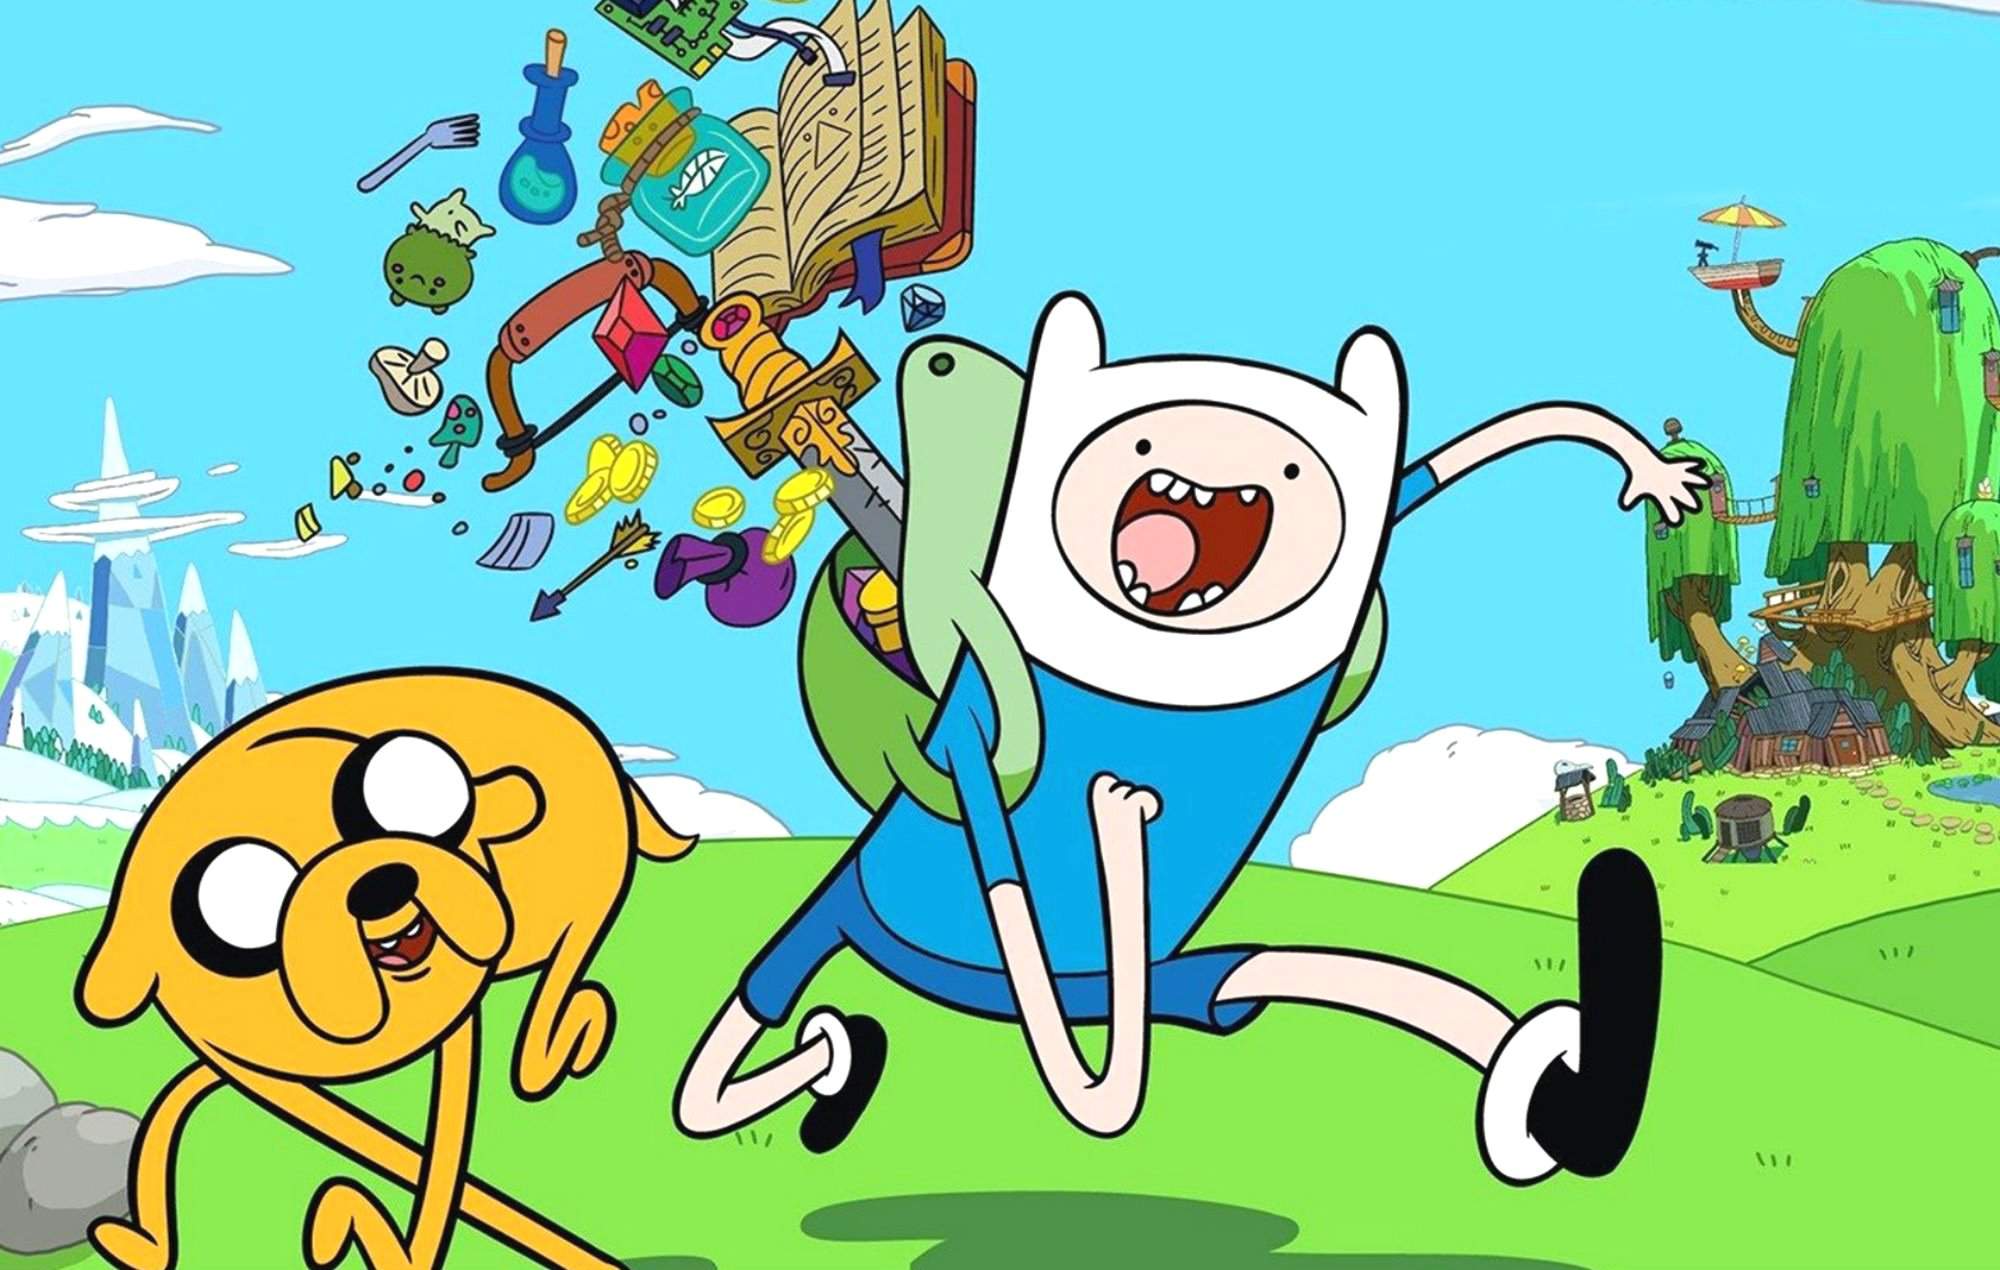 HBO Adventure time